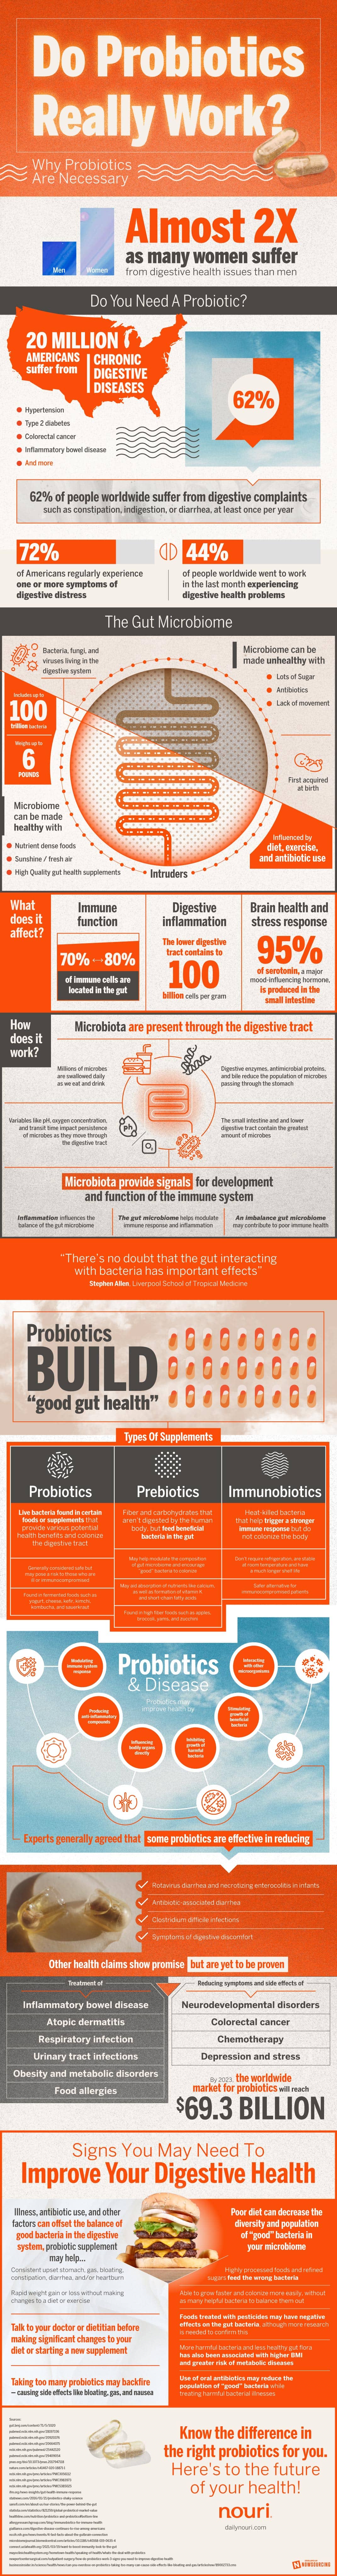 Probiotics - What and Why?